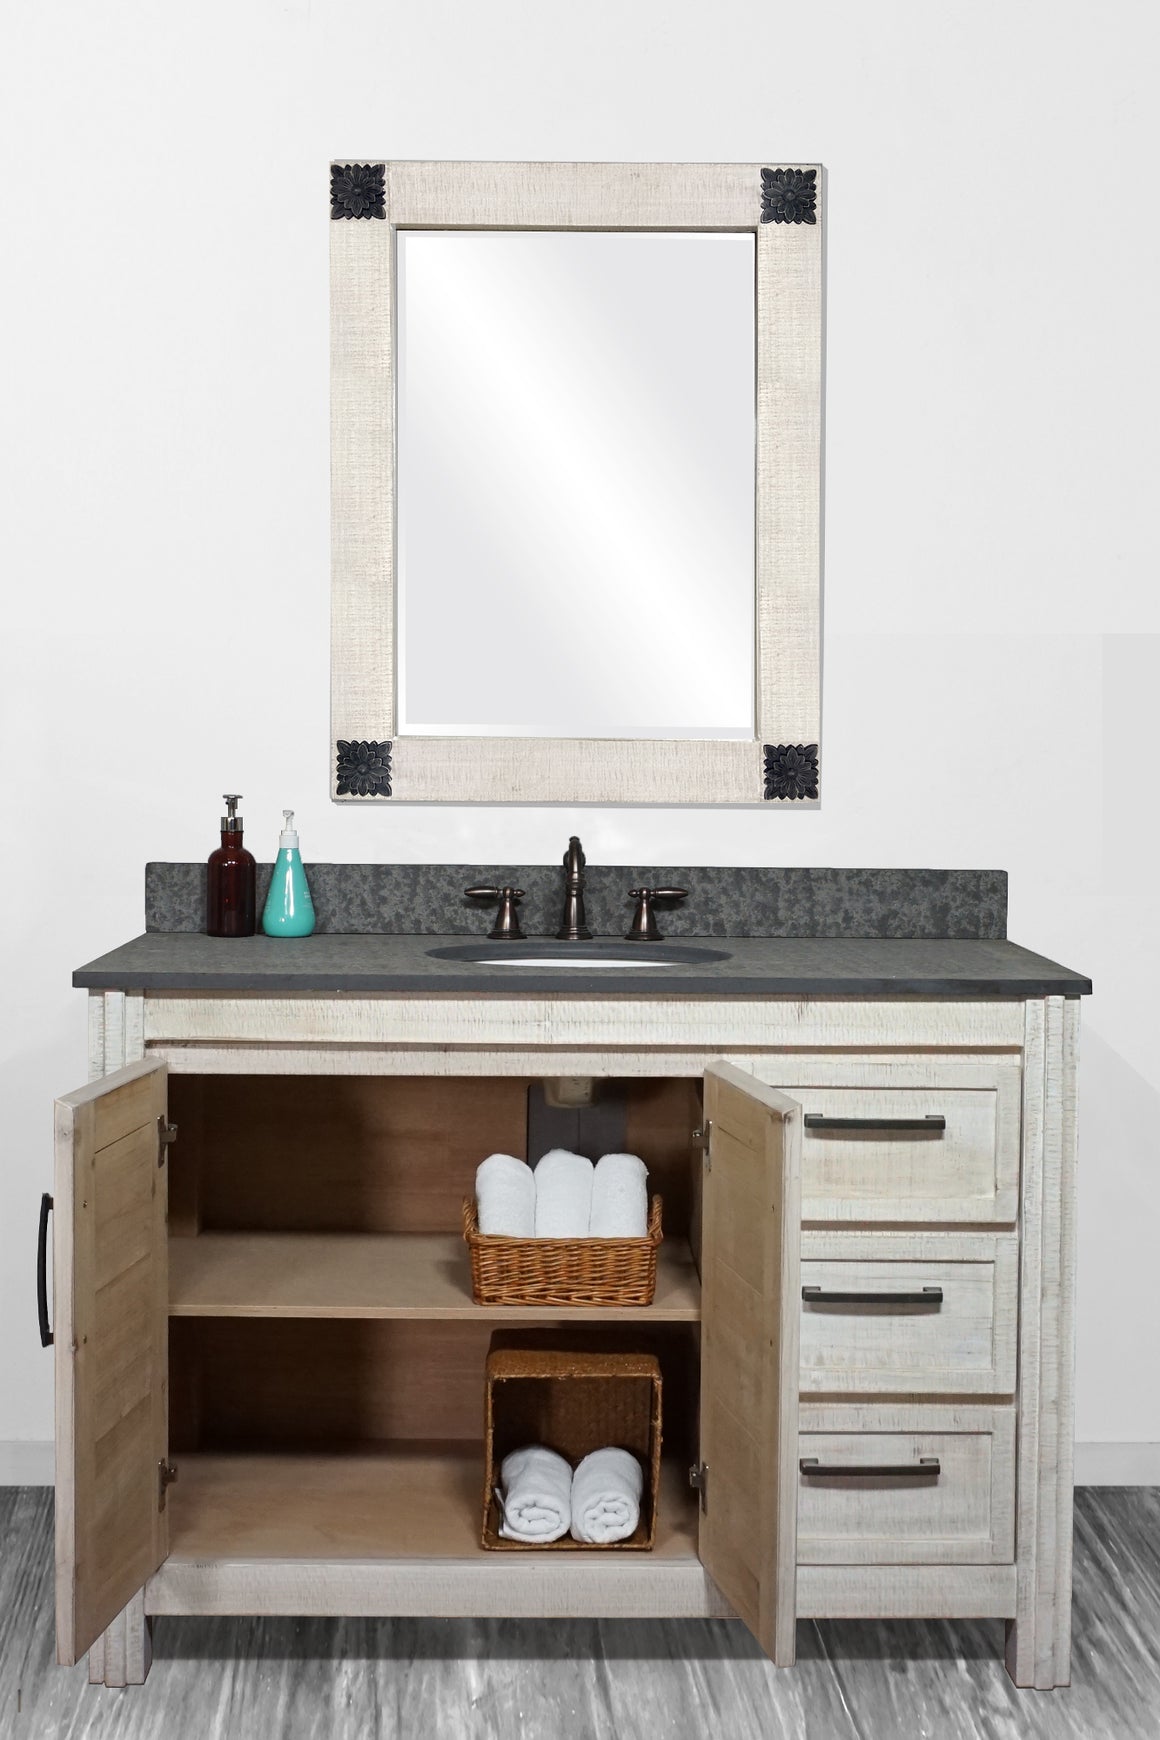 48" Solid Wood Single Sink Vanity With Polished Textured Surface Granite Top-No Faucet